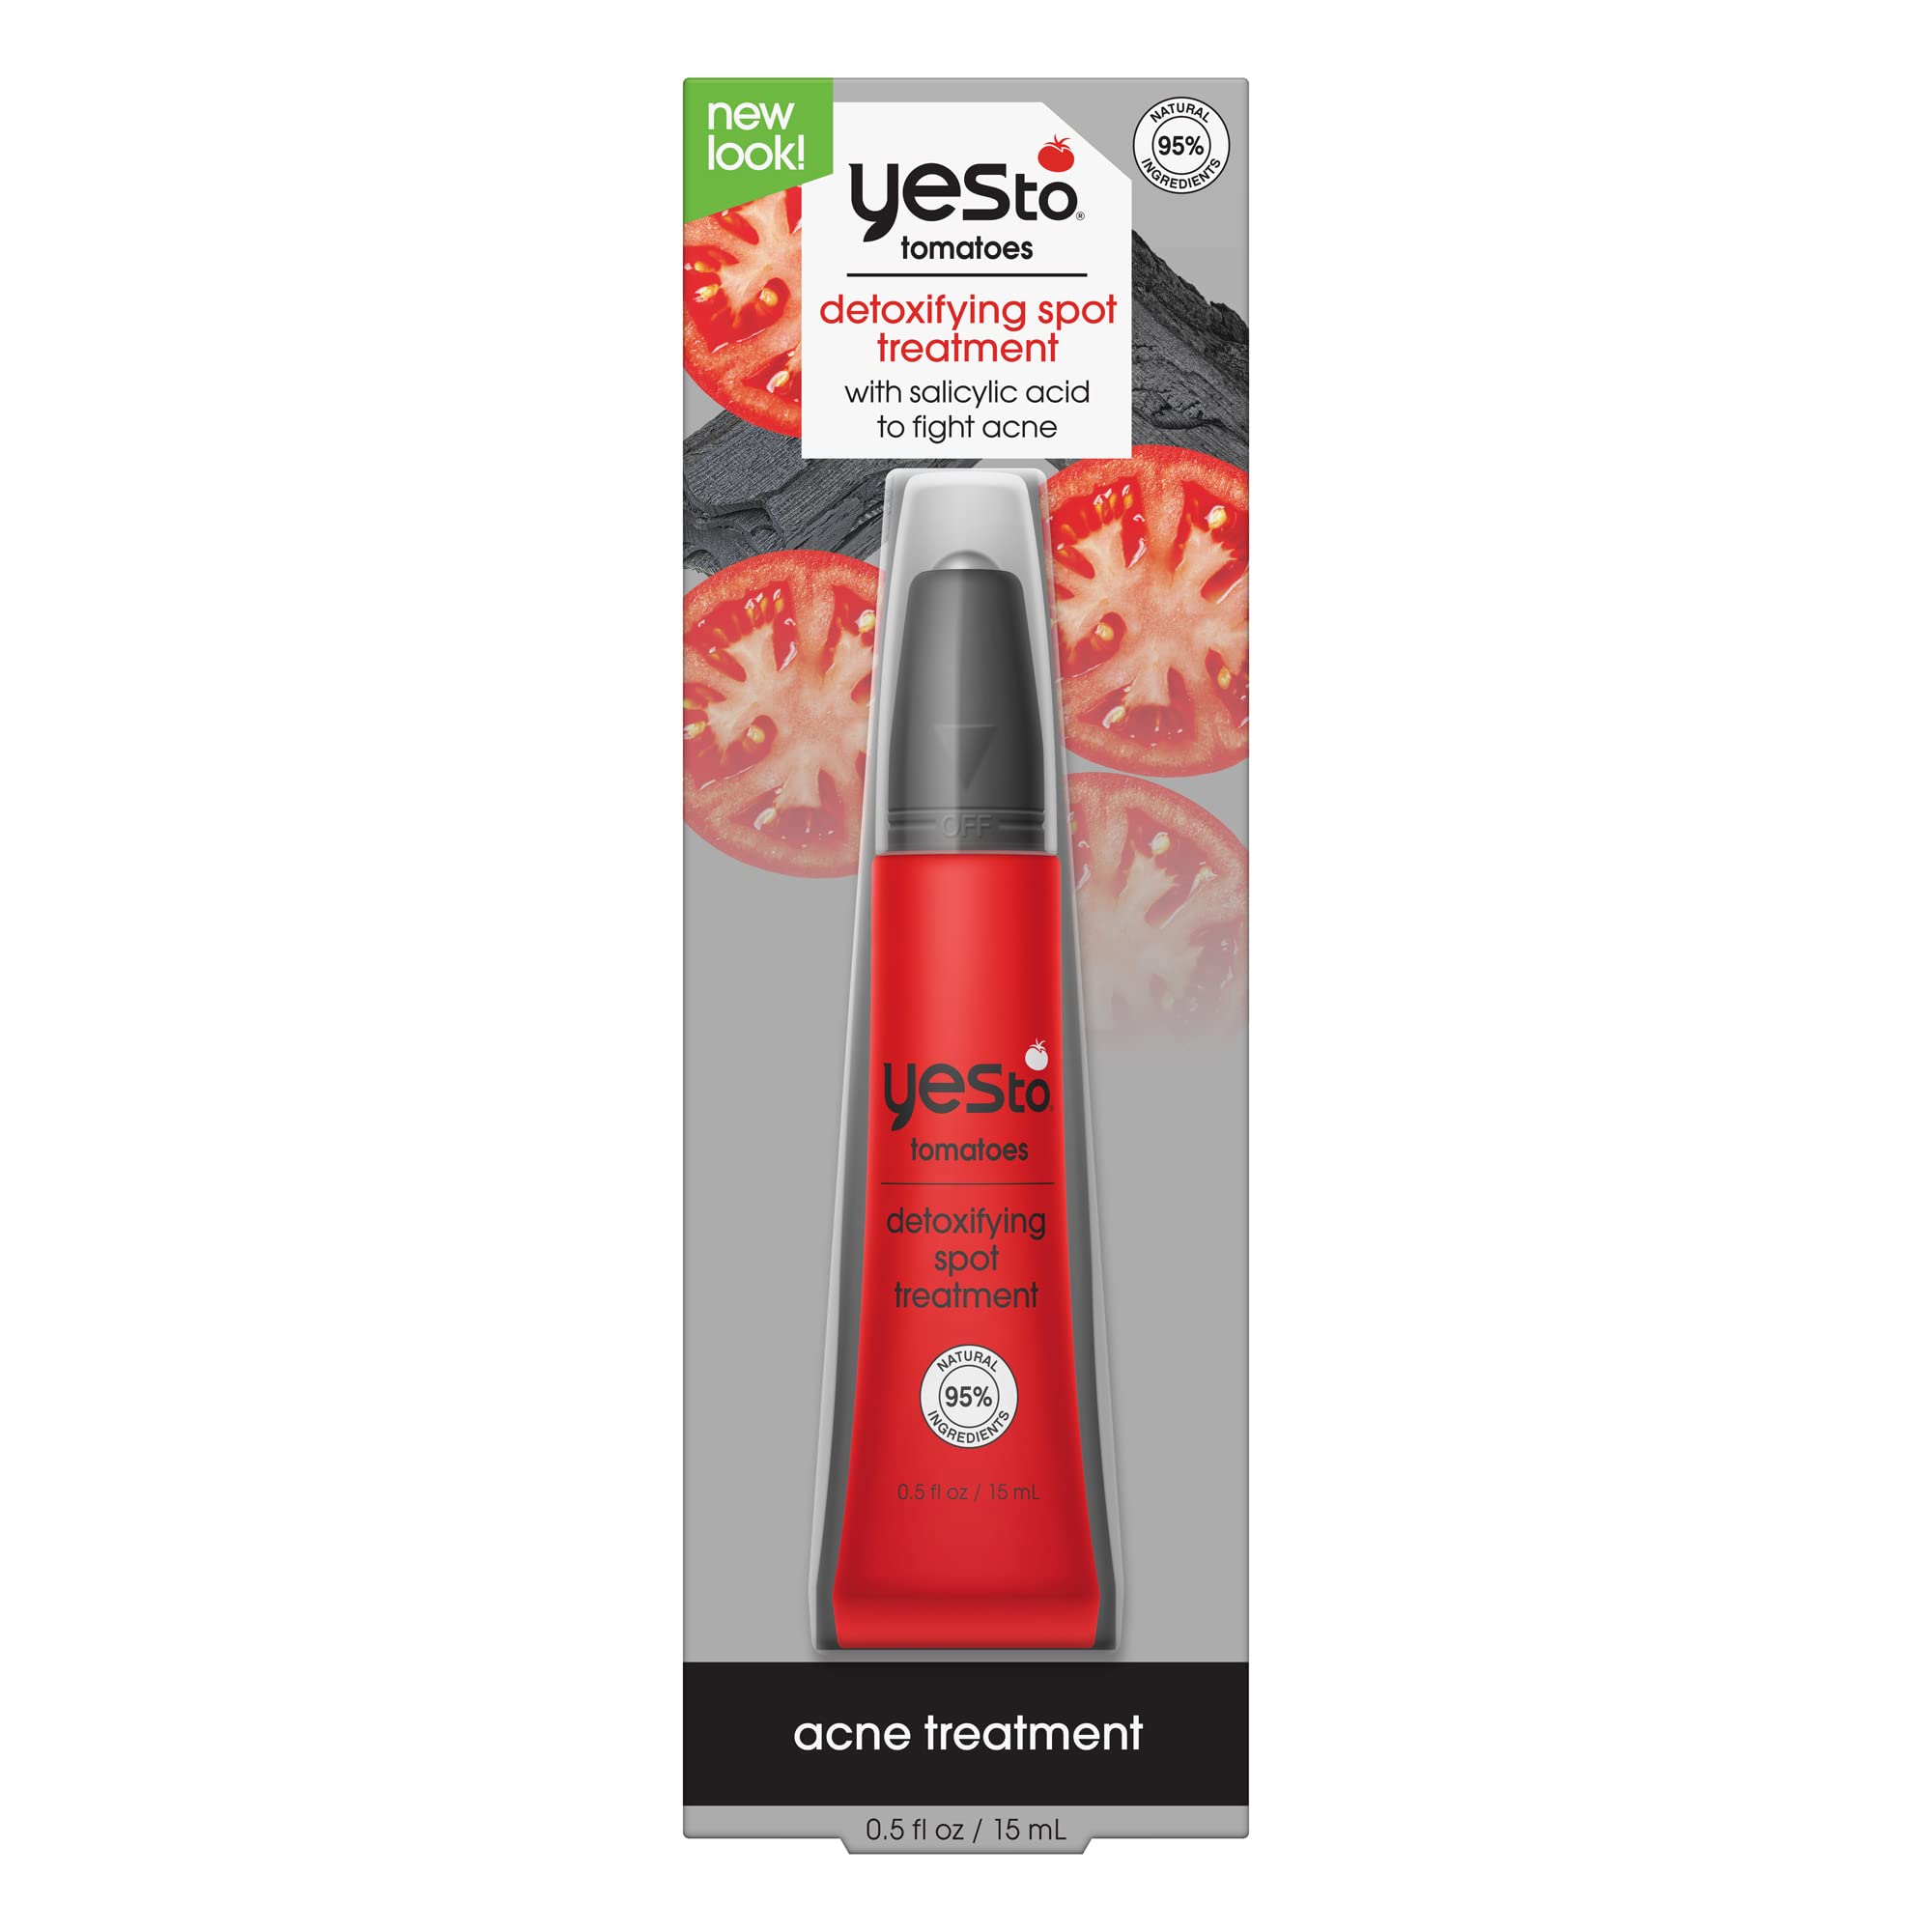 Yes To Tomatoes Spot Treatment, Detoxifying Formula To Help Banish Pimples While Reducing Redness, With Salicylic Acid & Charcoal, Natural, Vegan &CrueltyFree, 0.5 Fl Oz